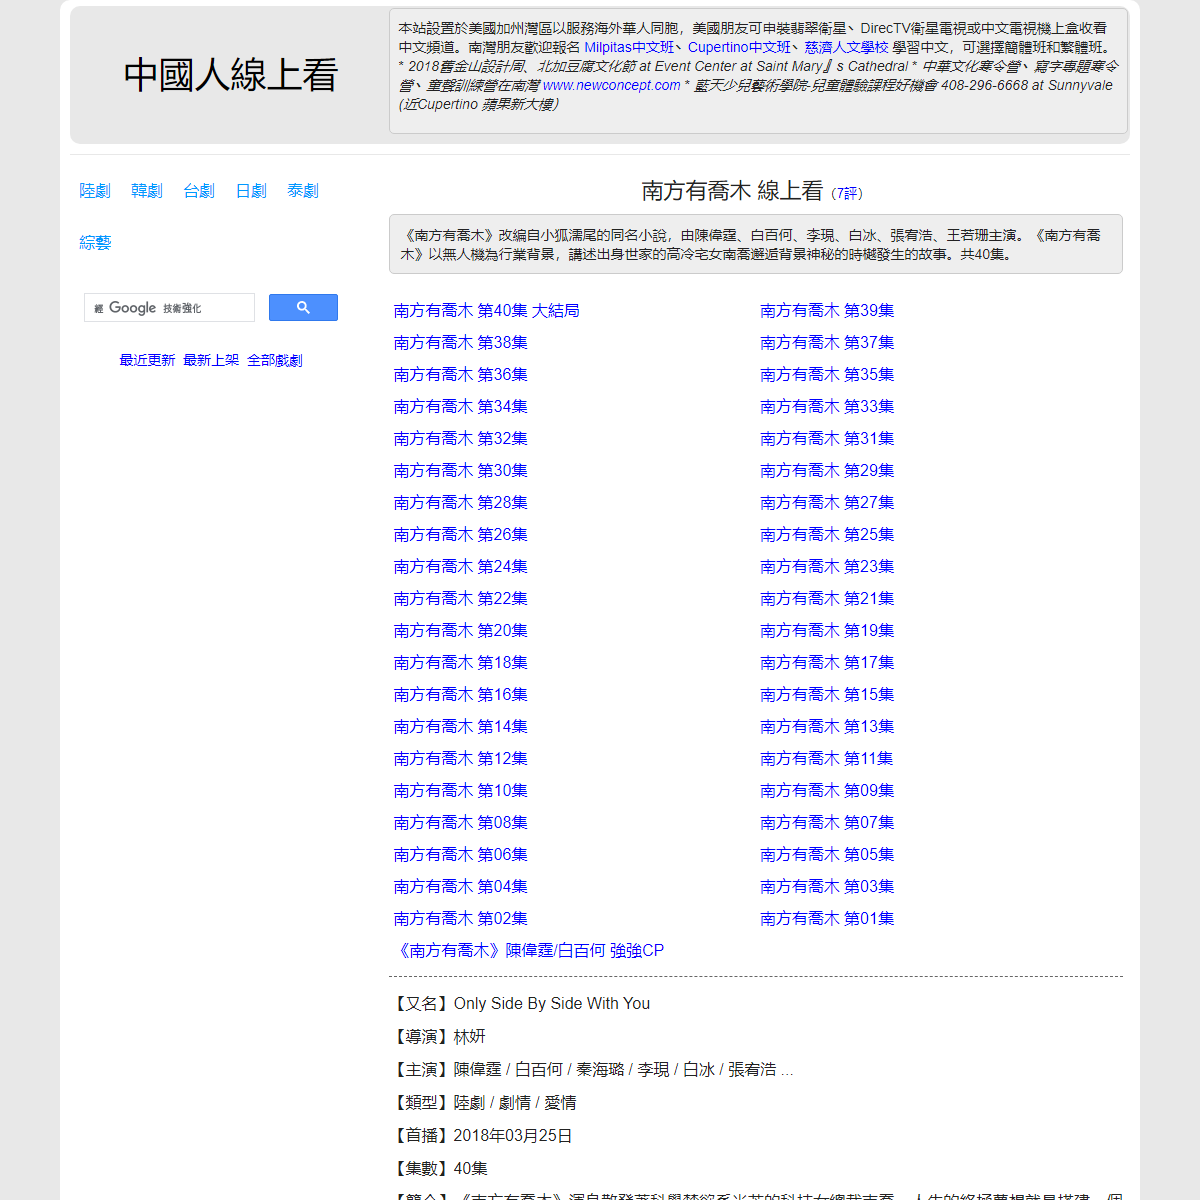 A complete backup of https://chinaq.tv/cn180325/